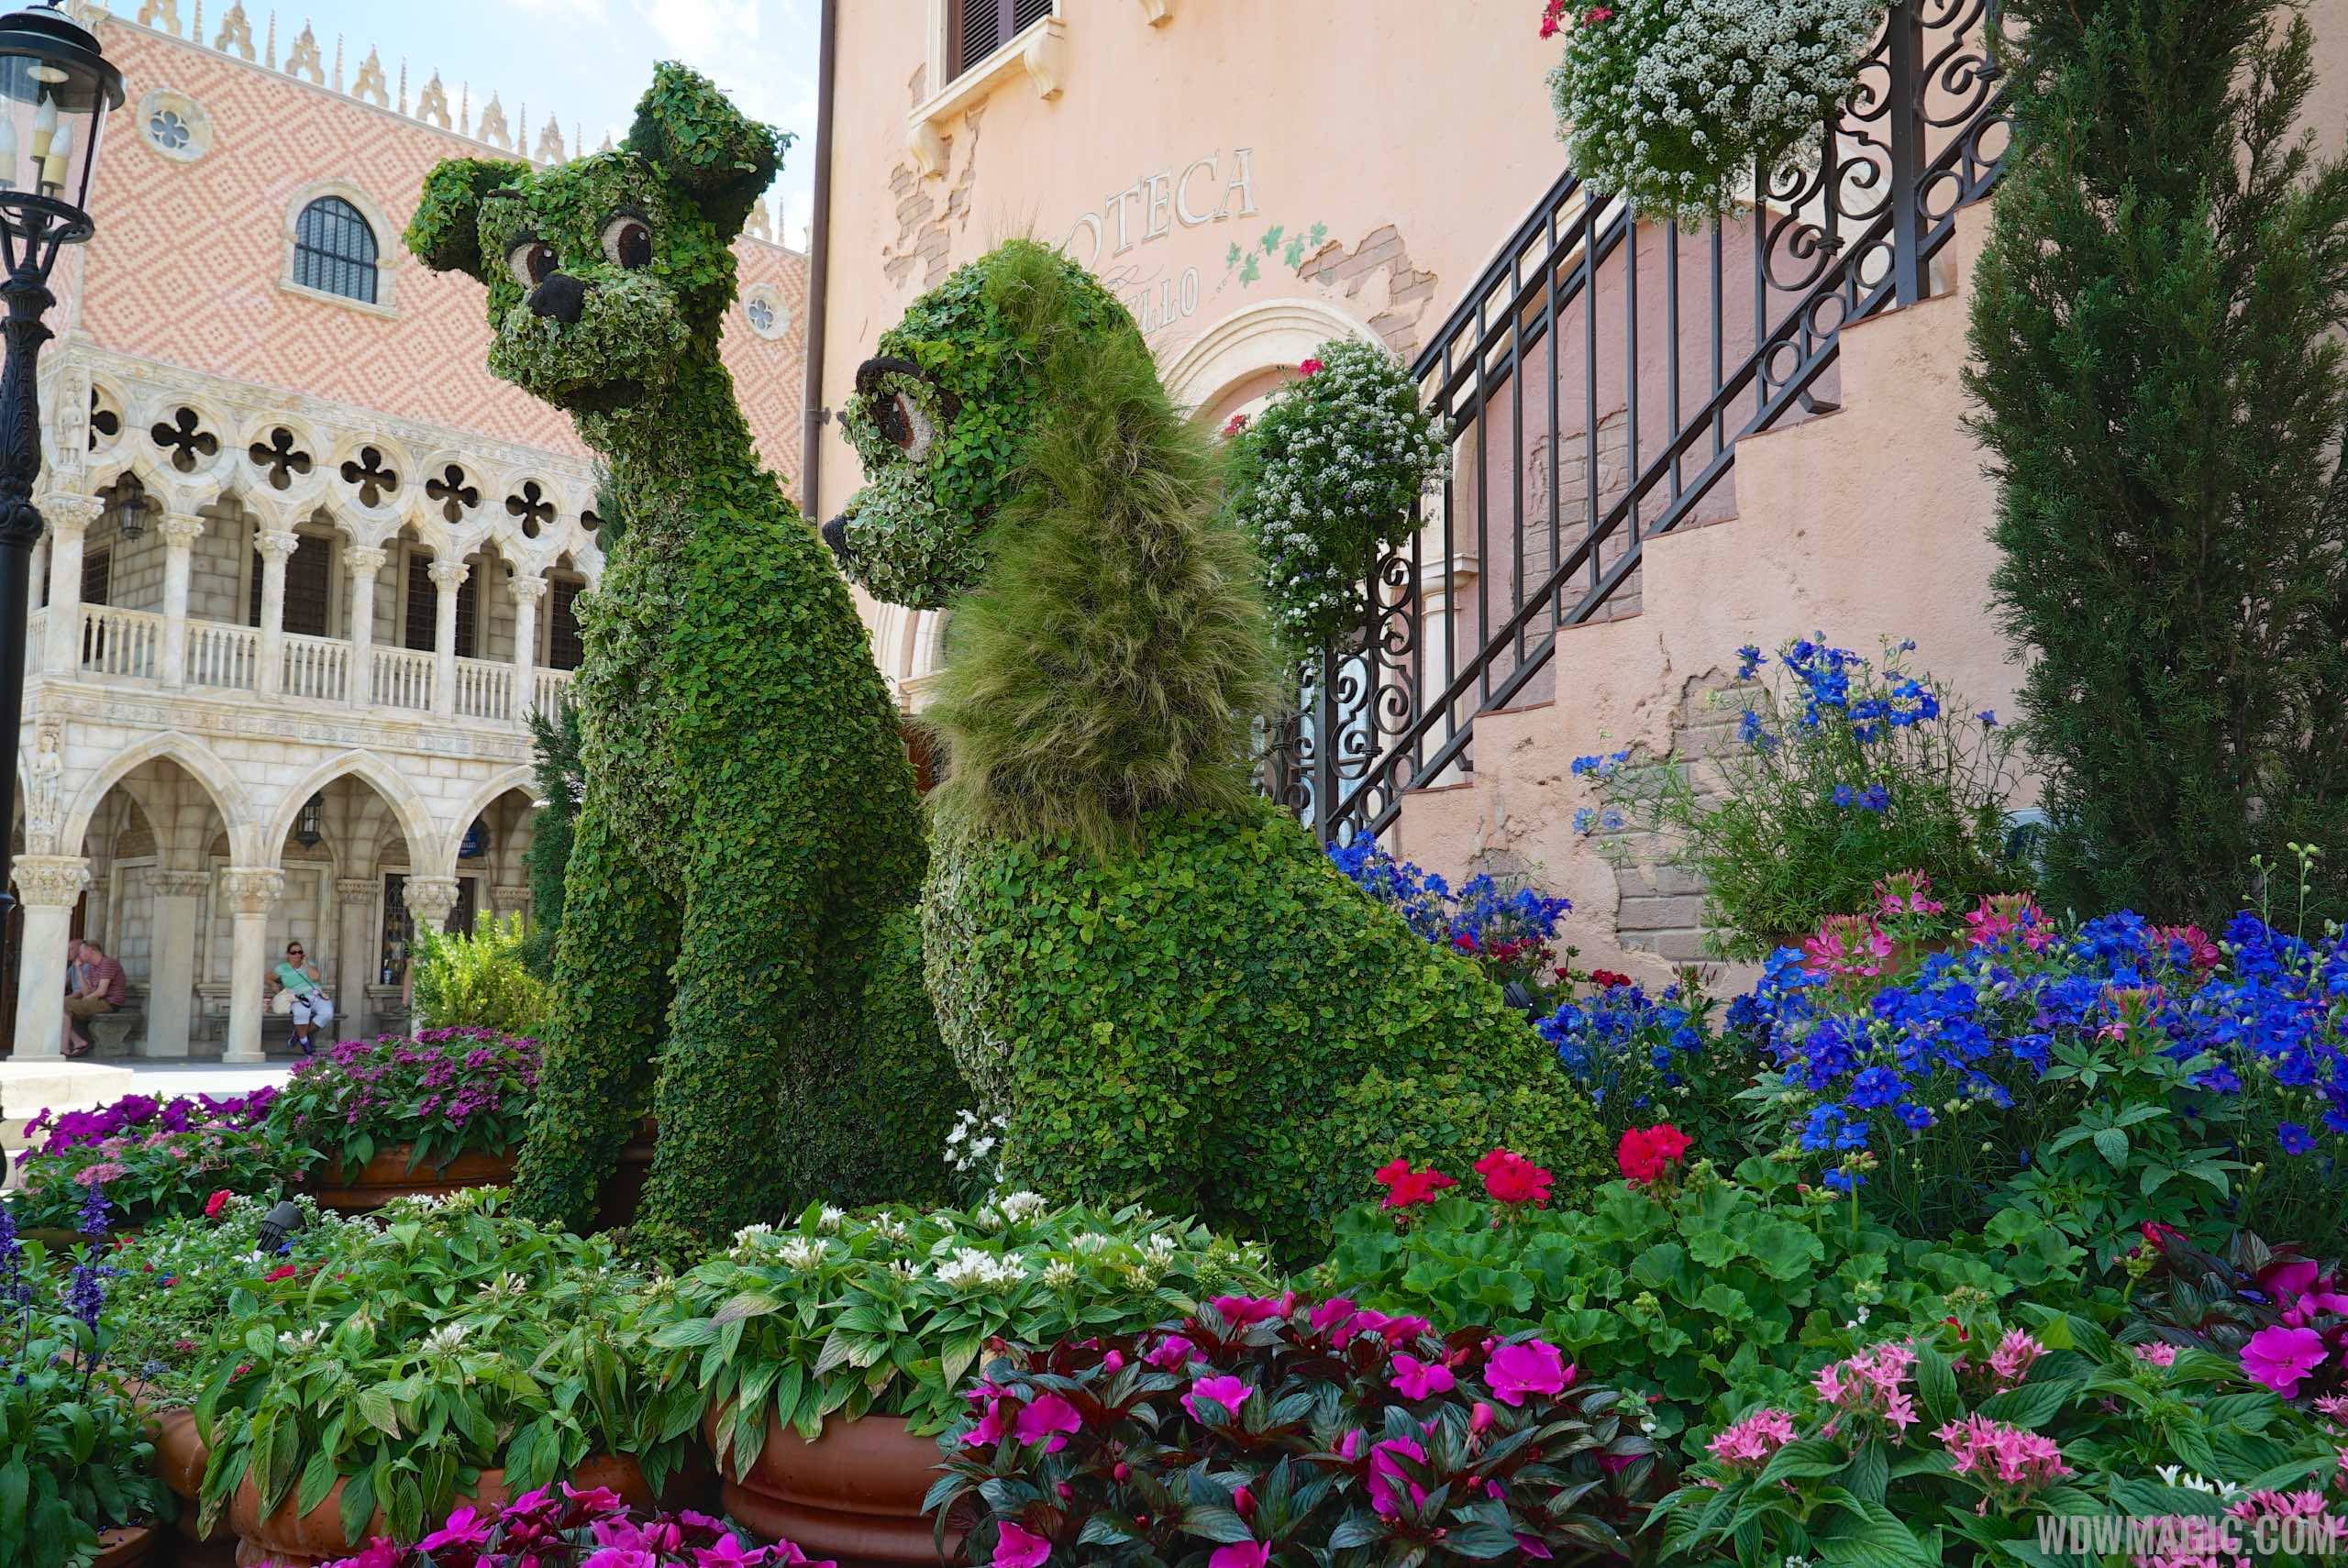 2015 Epcot Flower and Garden Festival - Lady and the Tramp topiary